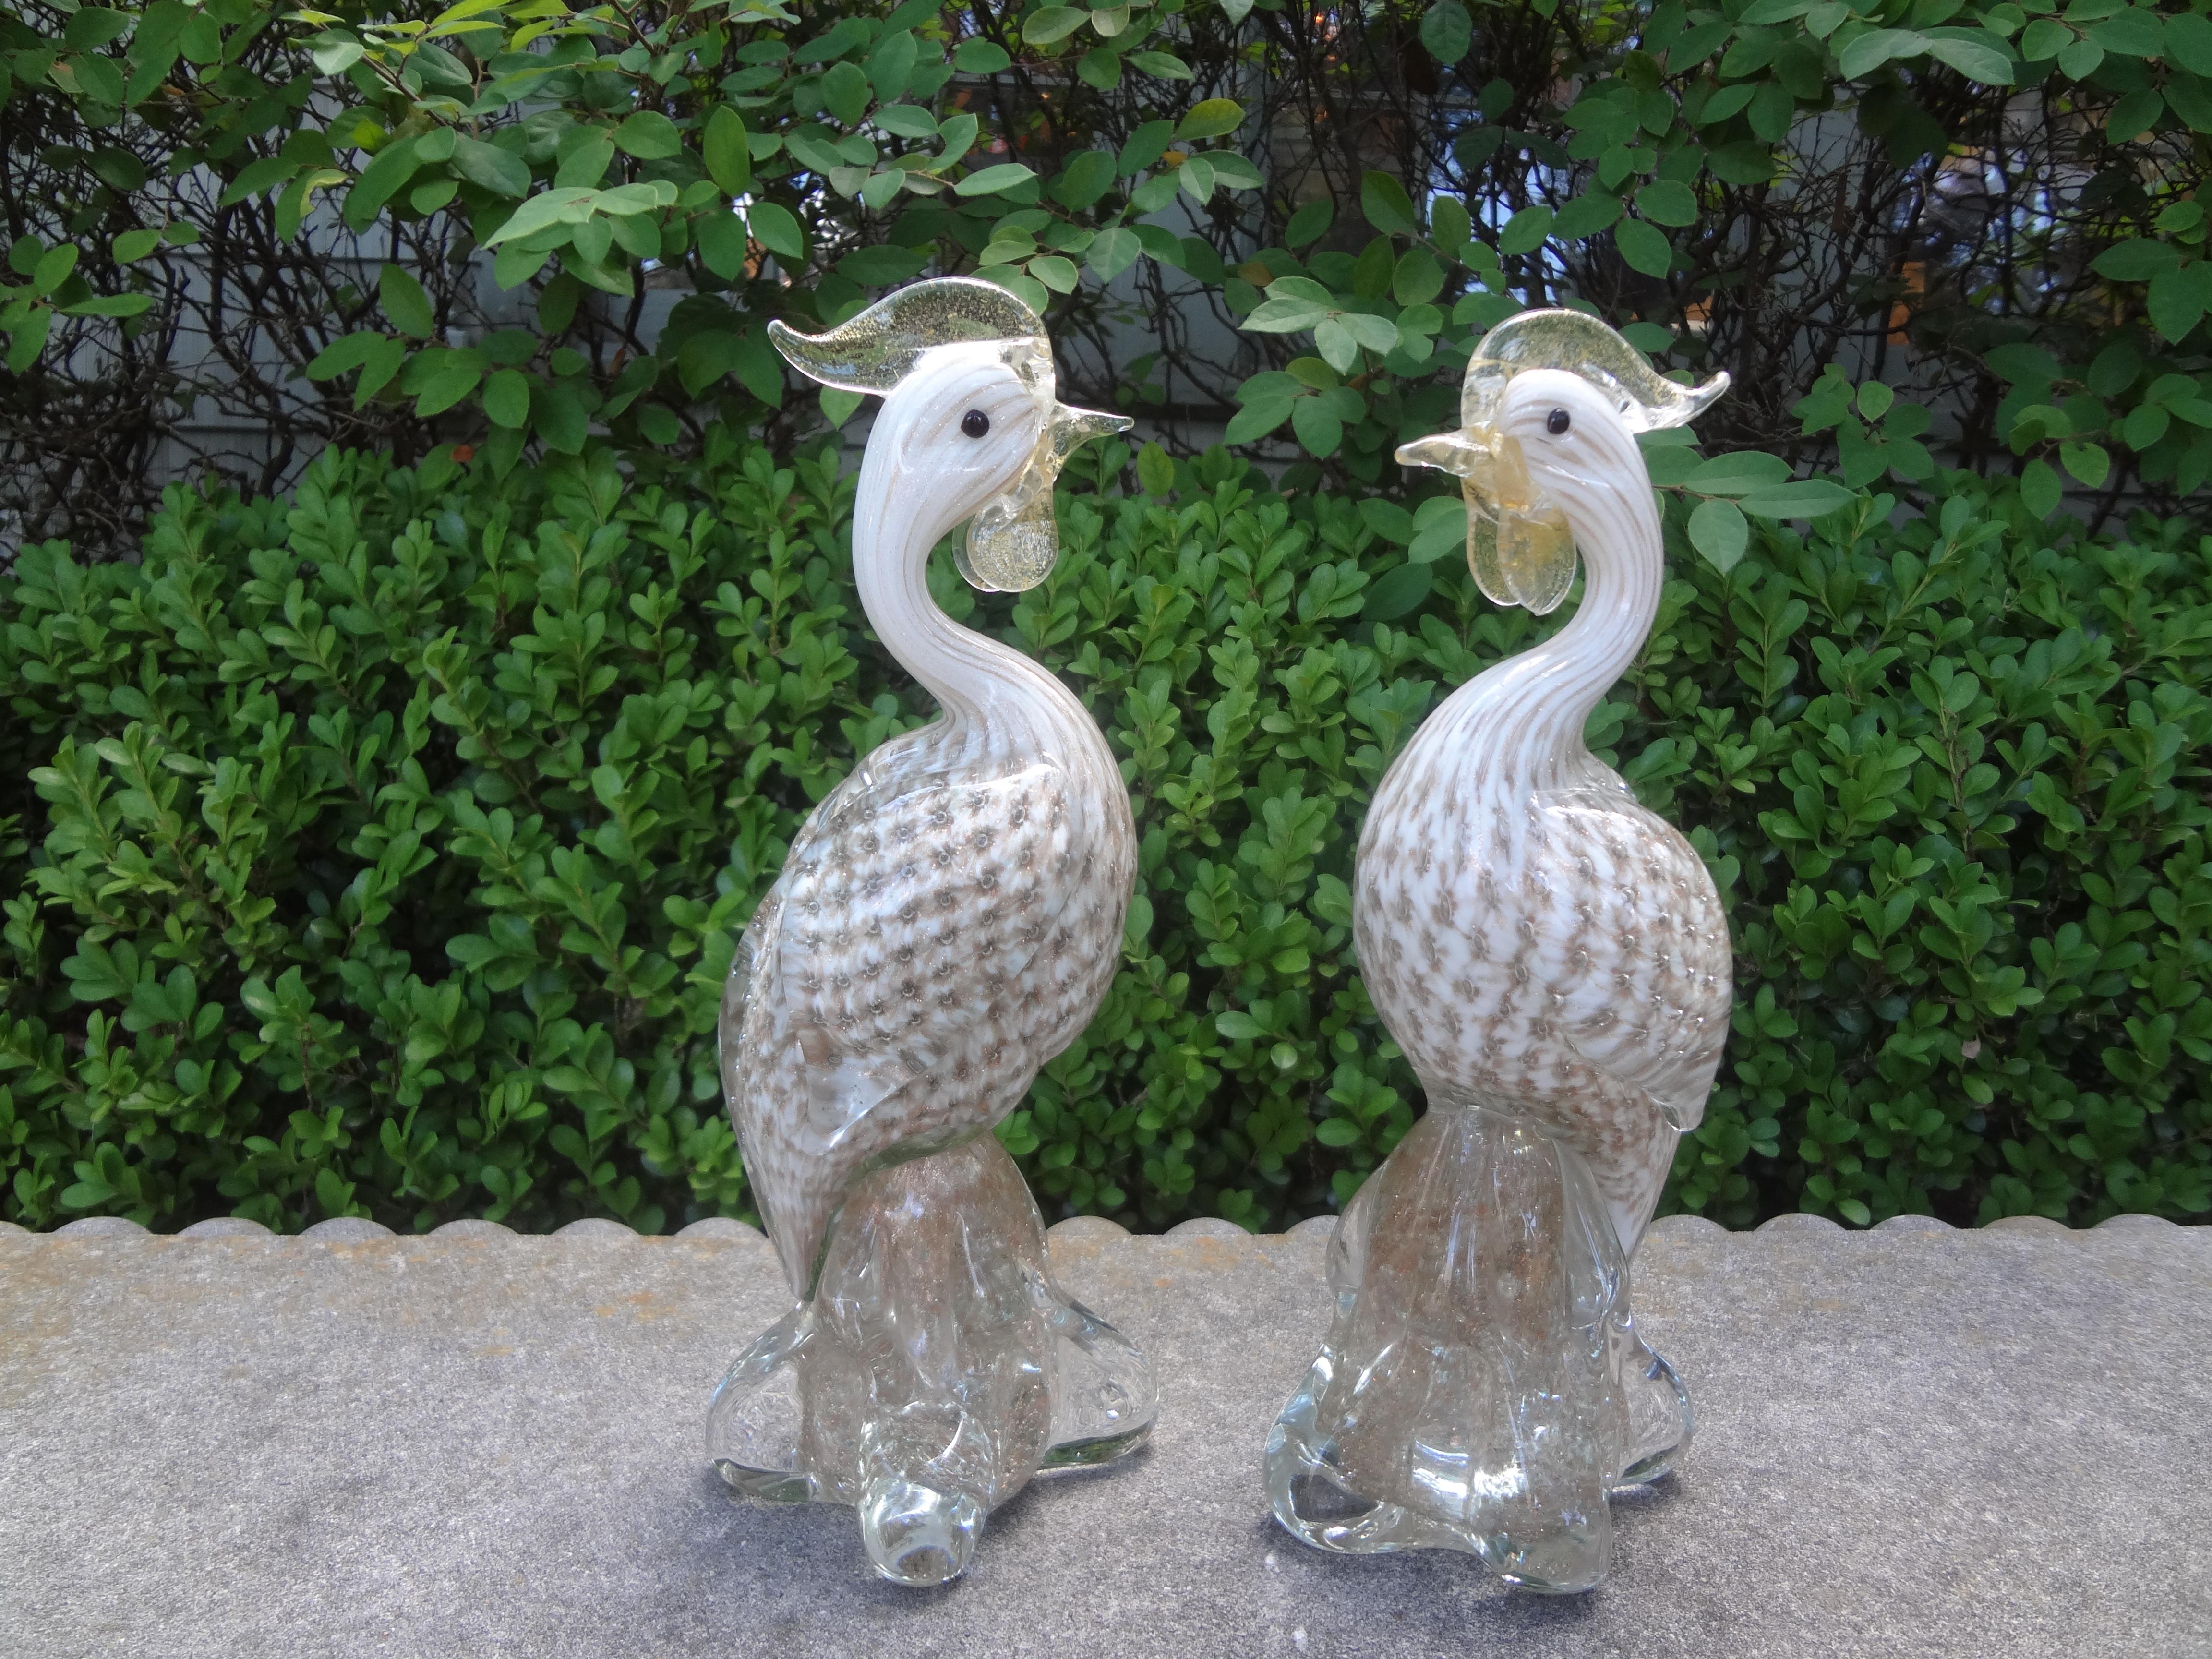 Pair of Murano glass birds attributed to Archimede Seguso. This beautiful pair of 1970s era blown glass birds from Murano are attributed to Archimede Seguso (1909-1999) Italy.
Archimede Seguso was born on the island of Murano. His families glass